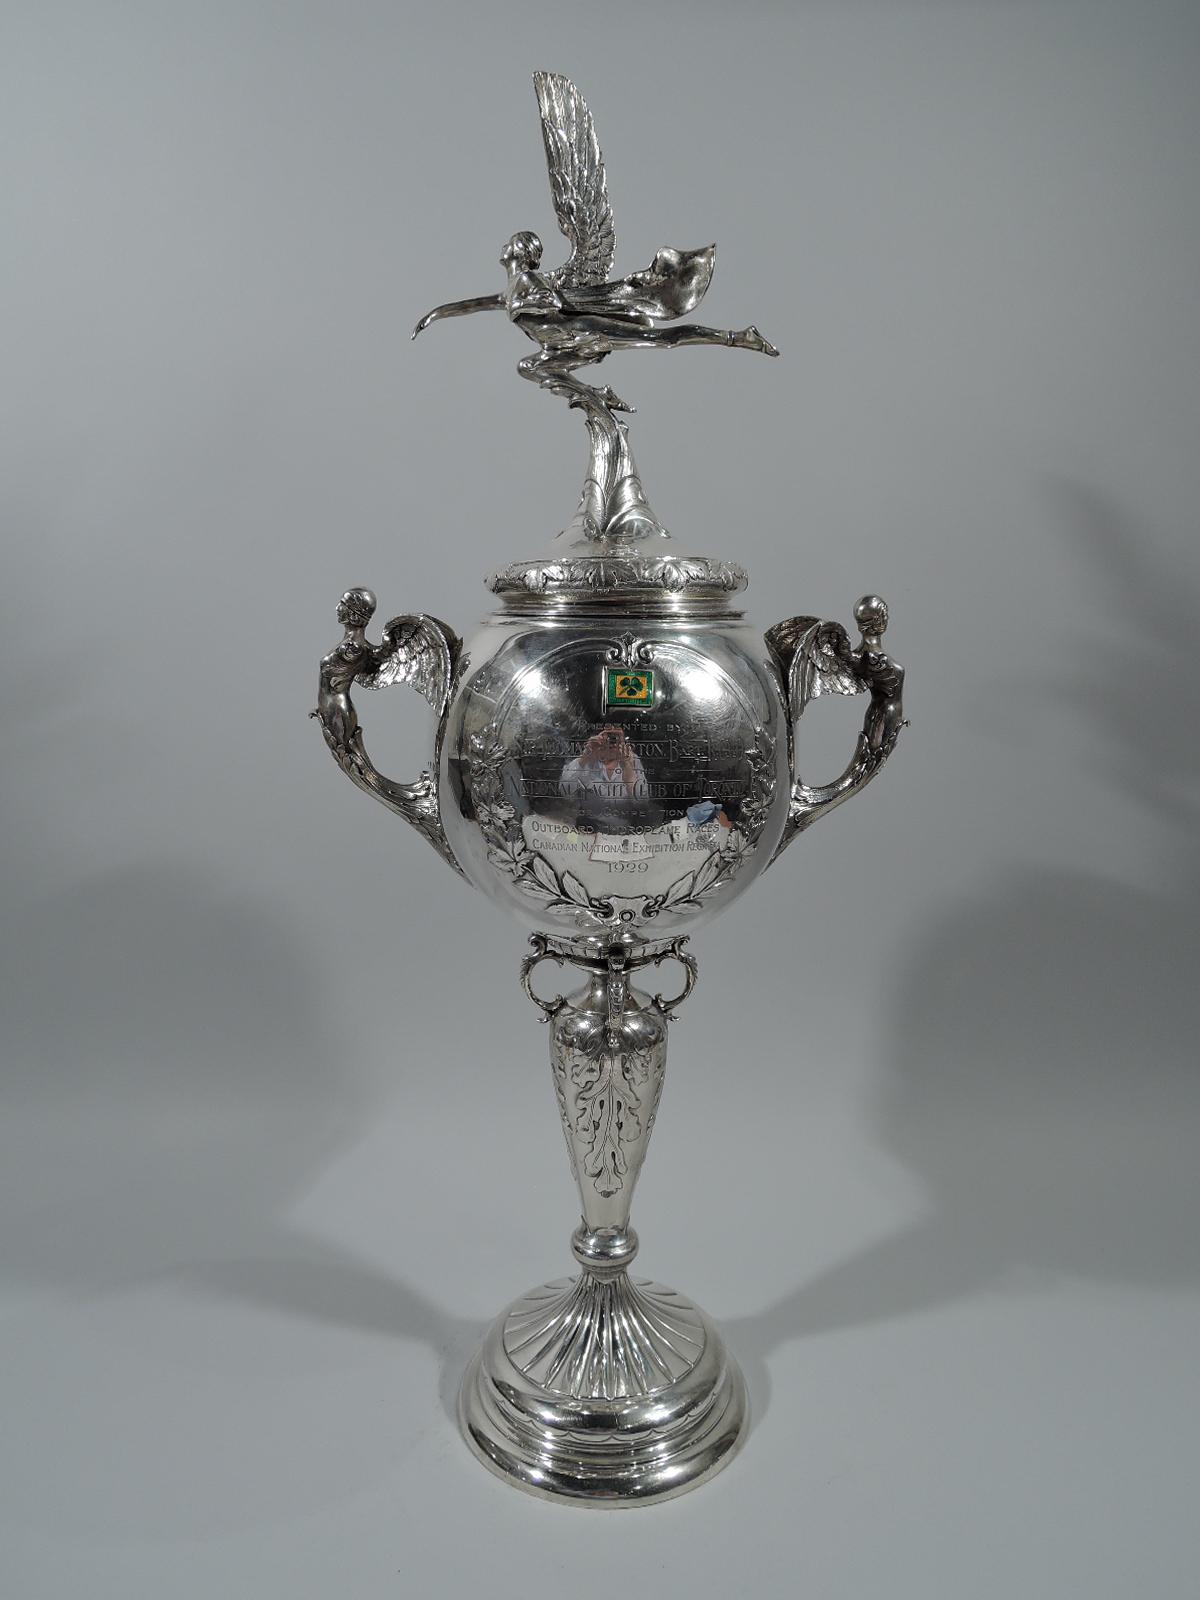 George V sterling silver trophy cup. Made by Goldsmiths & Silversmiths in London in 1929.

Bowl with wing-mounted and leaf-wrapped caryatid side handles. Applied enamel flags and circular and wreathed frames. One is inset with a chased motorboat in